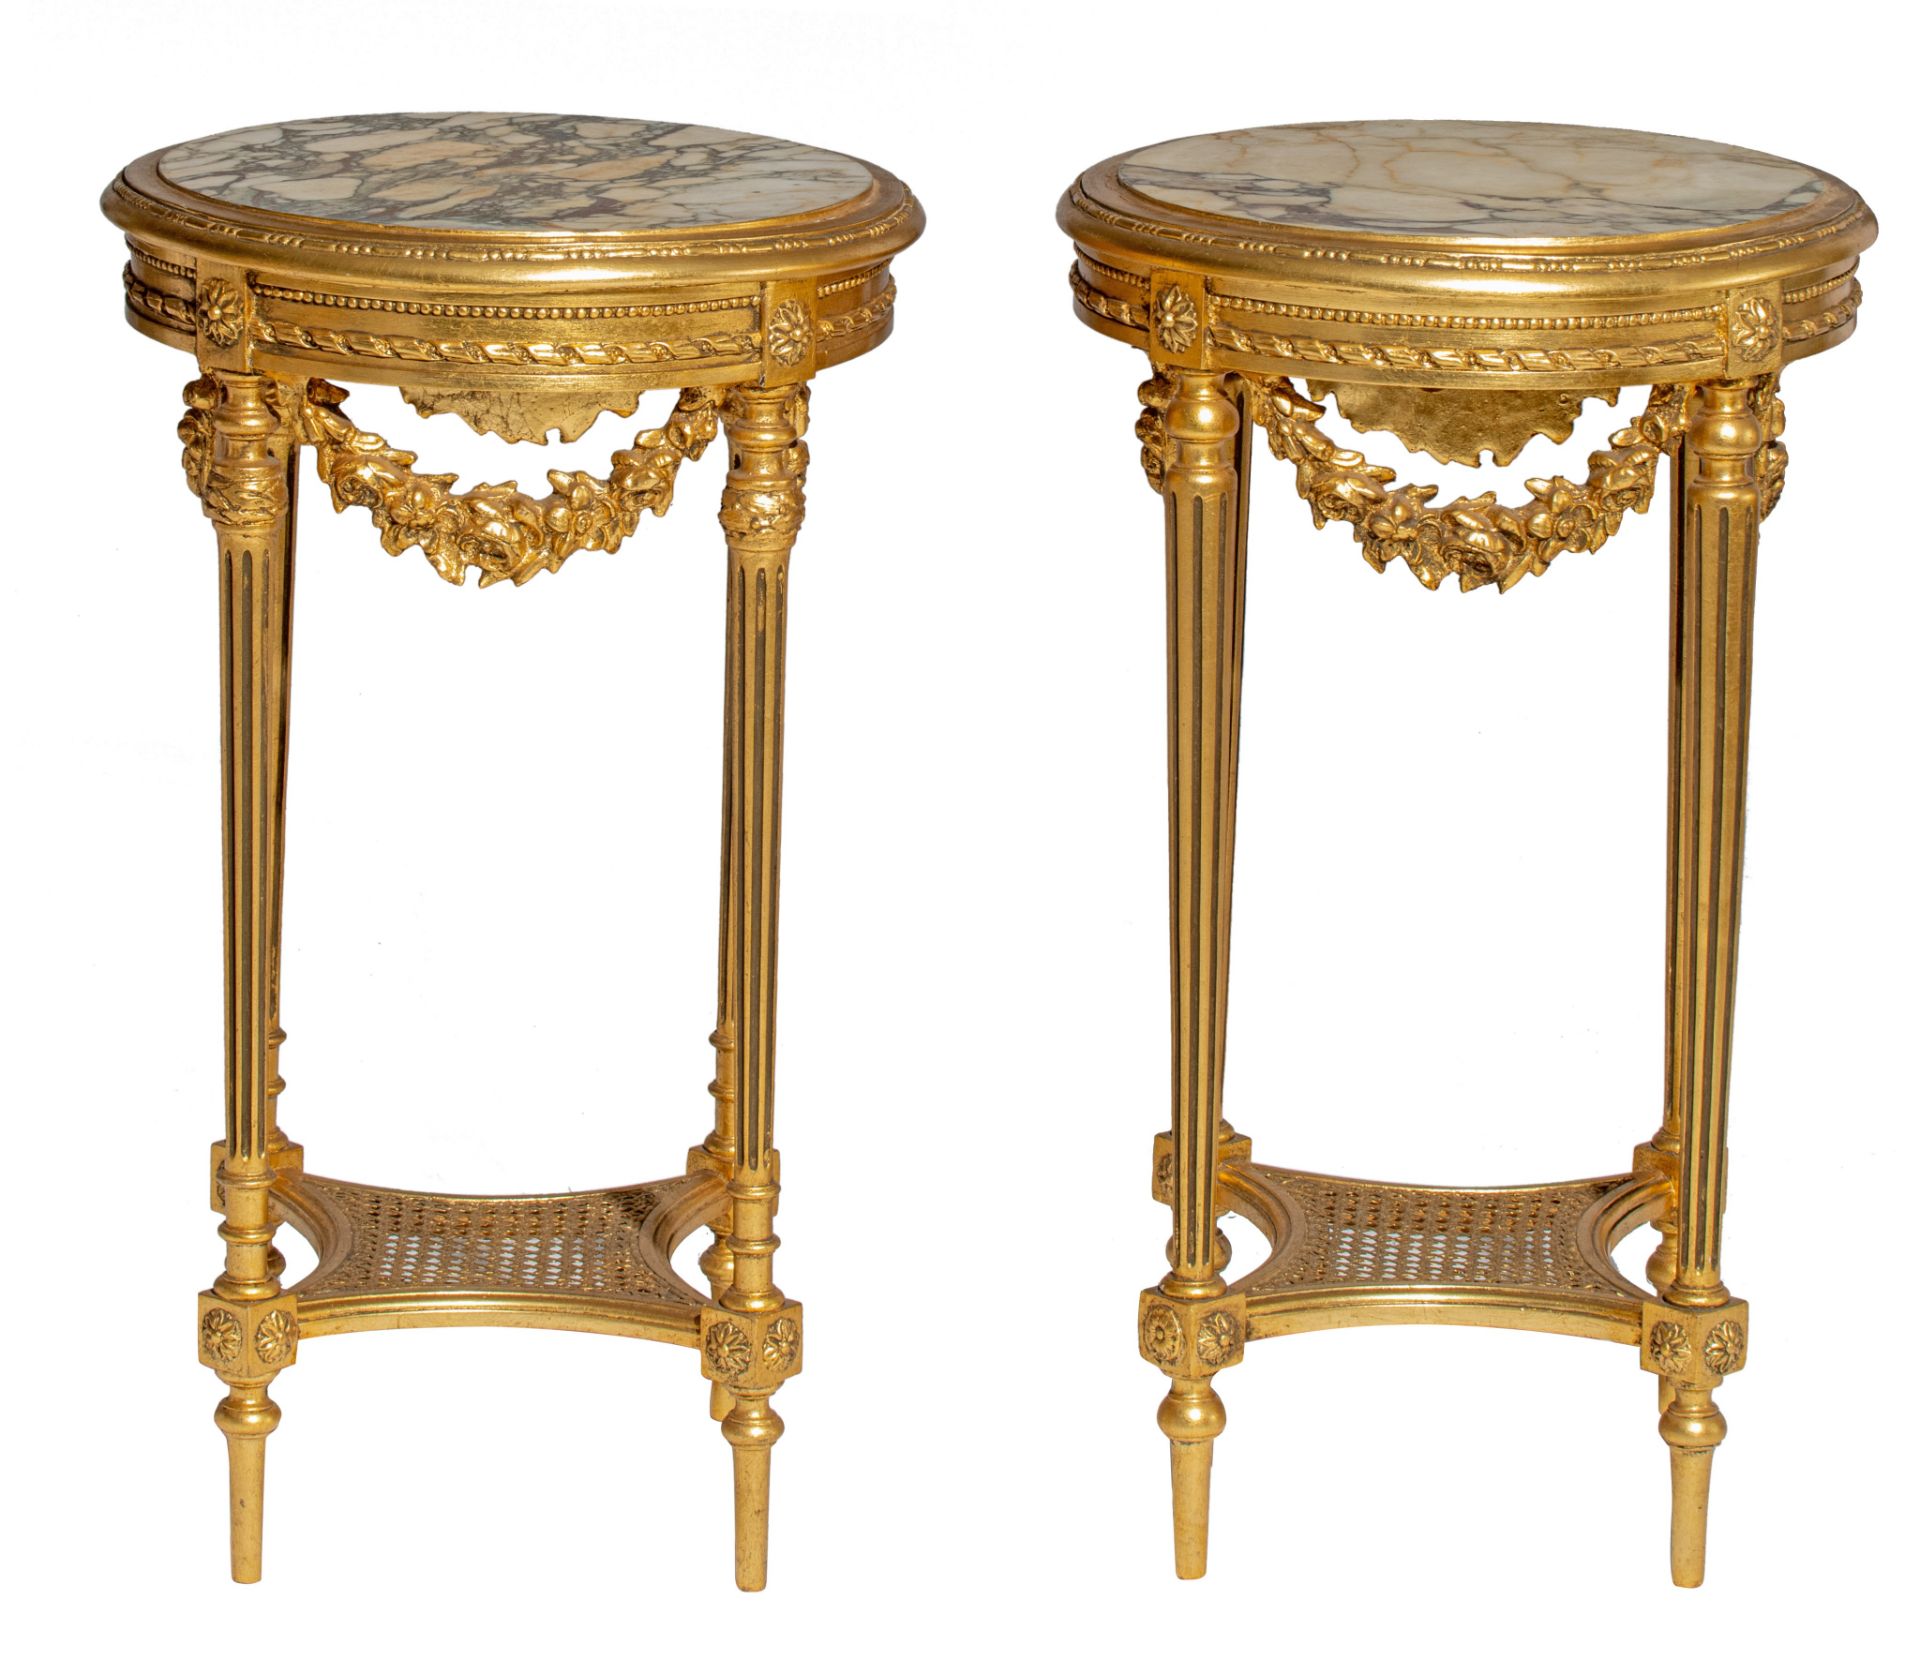 A pair of Neoclassical gilt bronze figural lamps on stands, and a matching pair of sculptures of put - Image 11 of 12